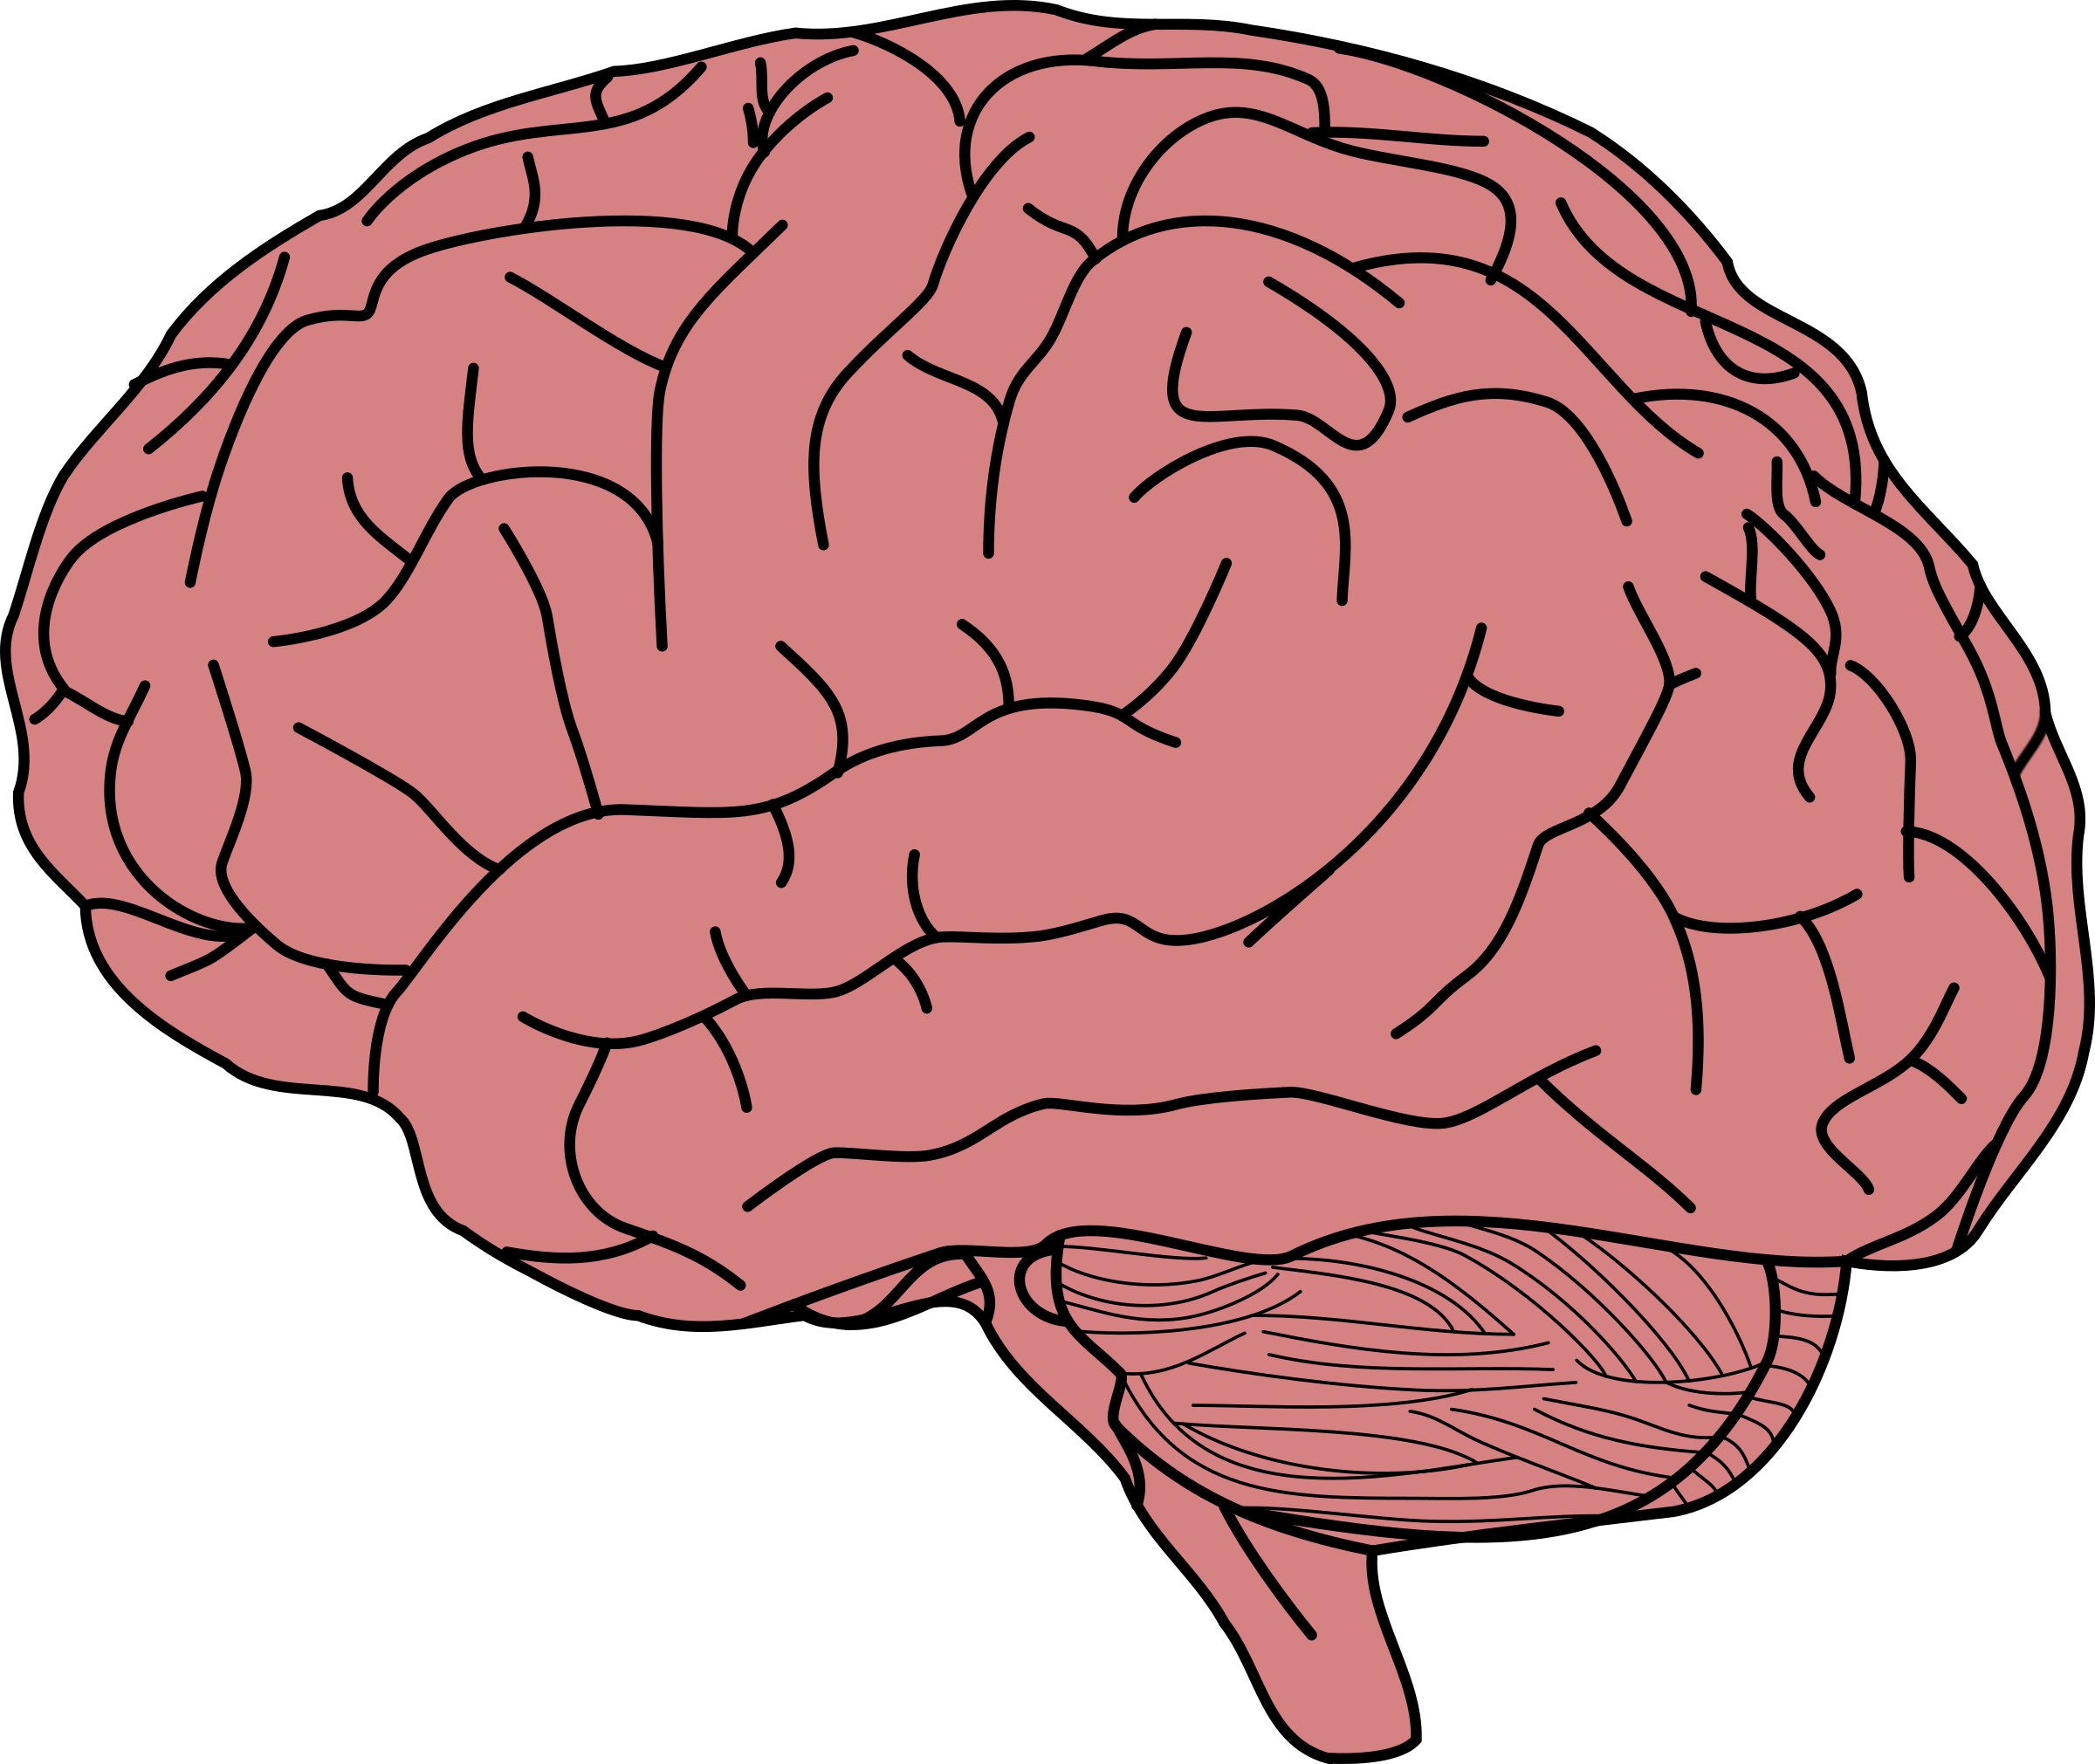 A Pink Brain With Black Lines